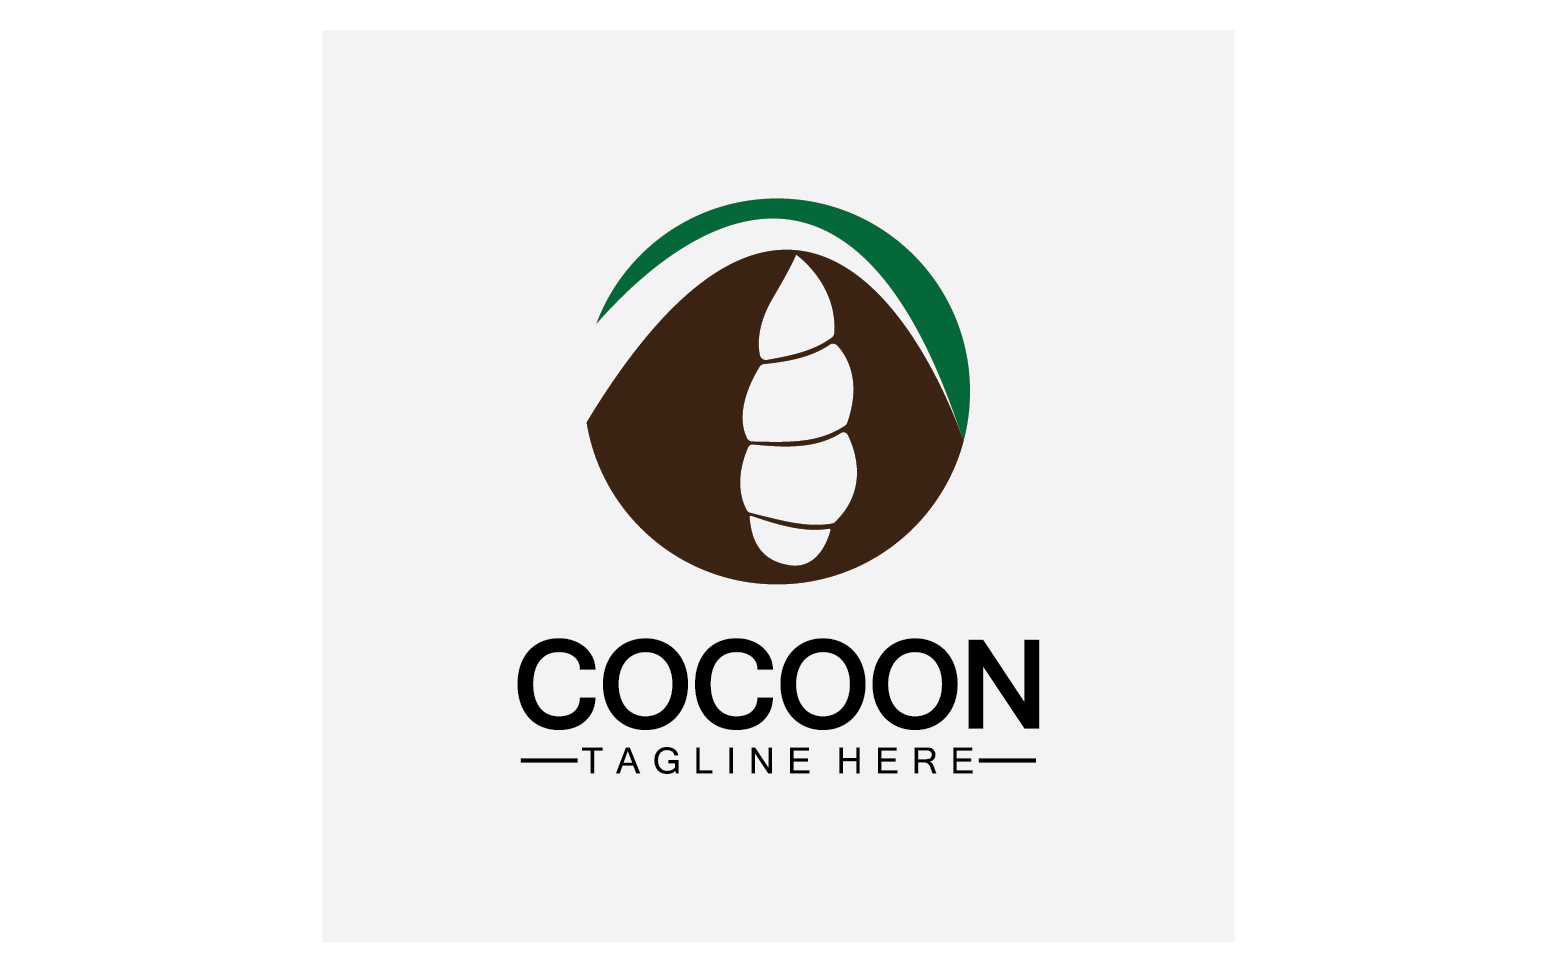 Cocoon butterfly logo icon vector v26